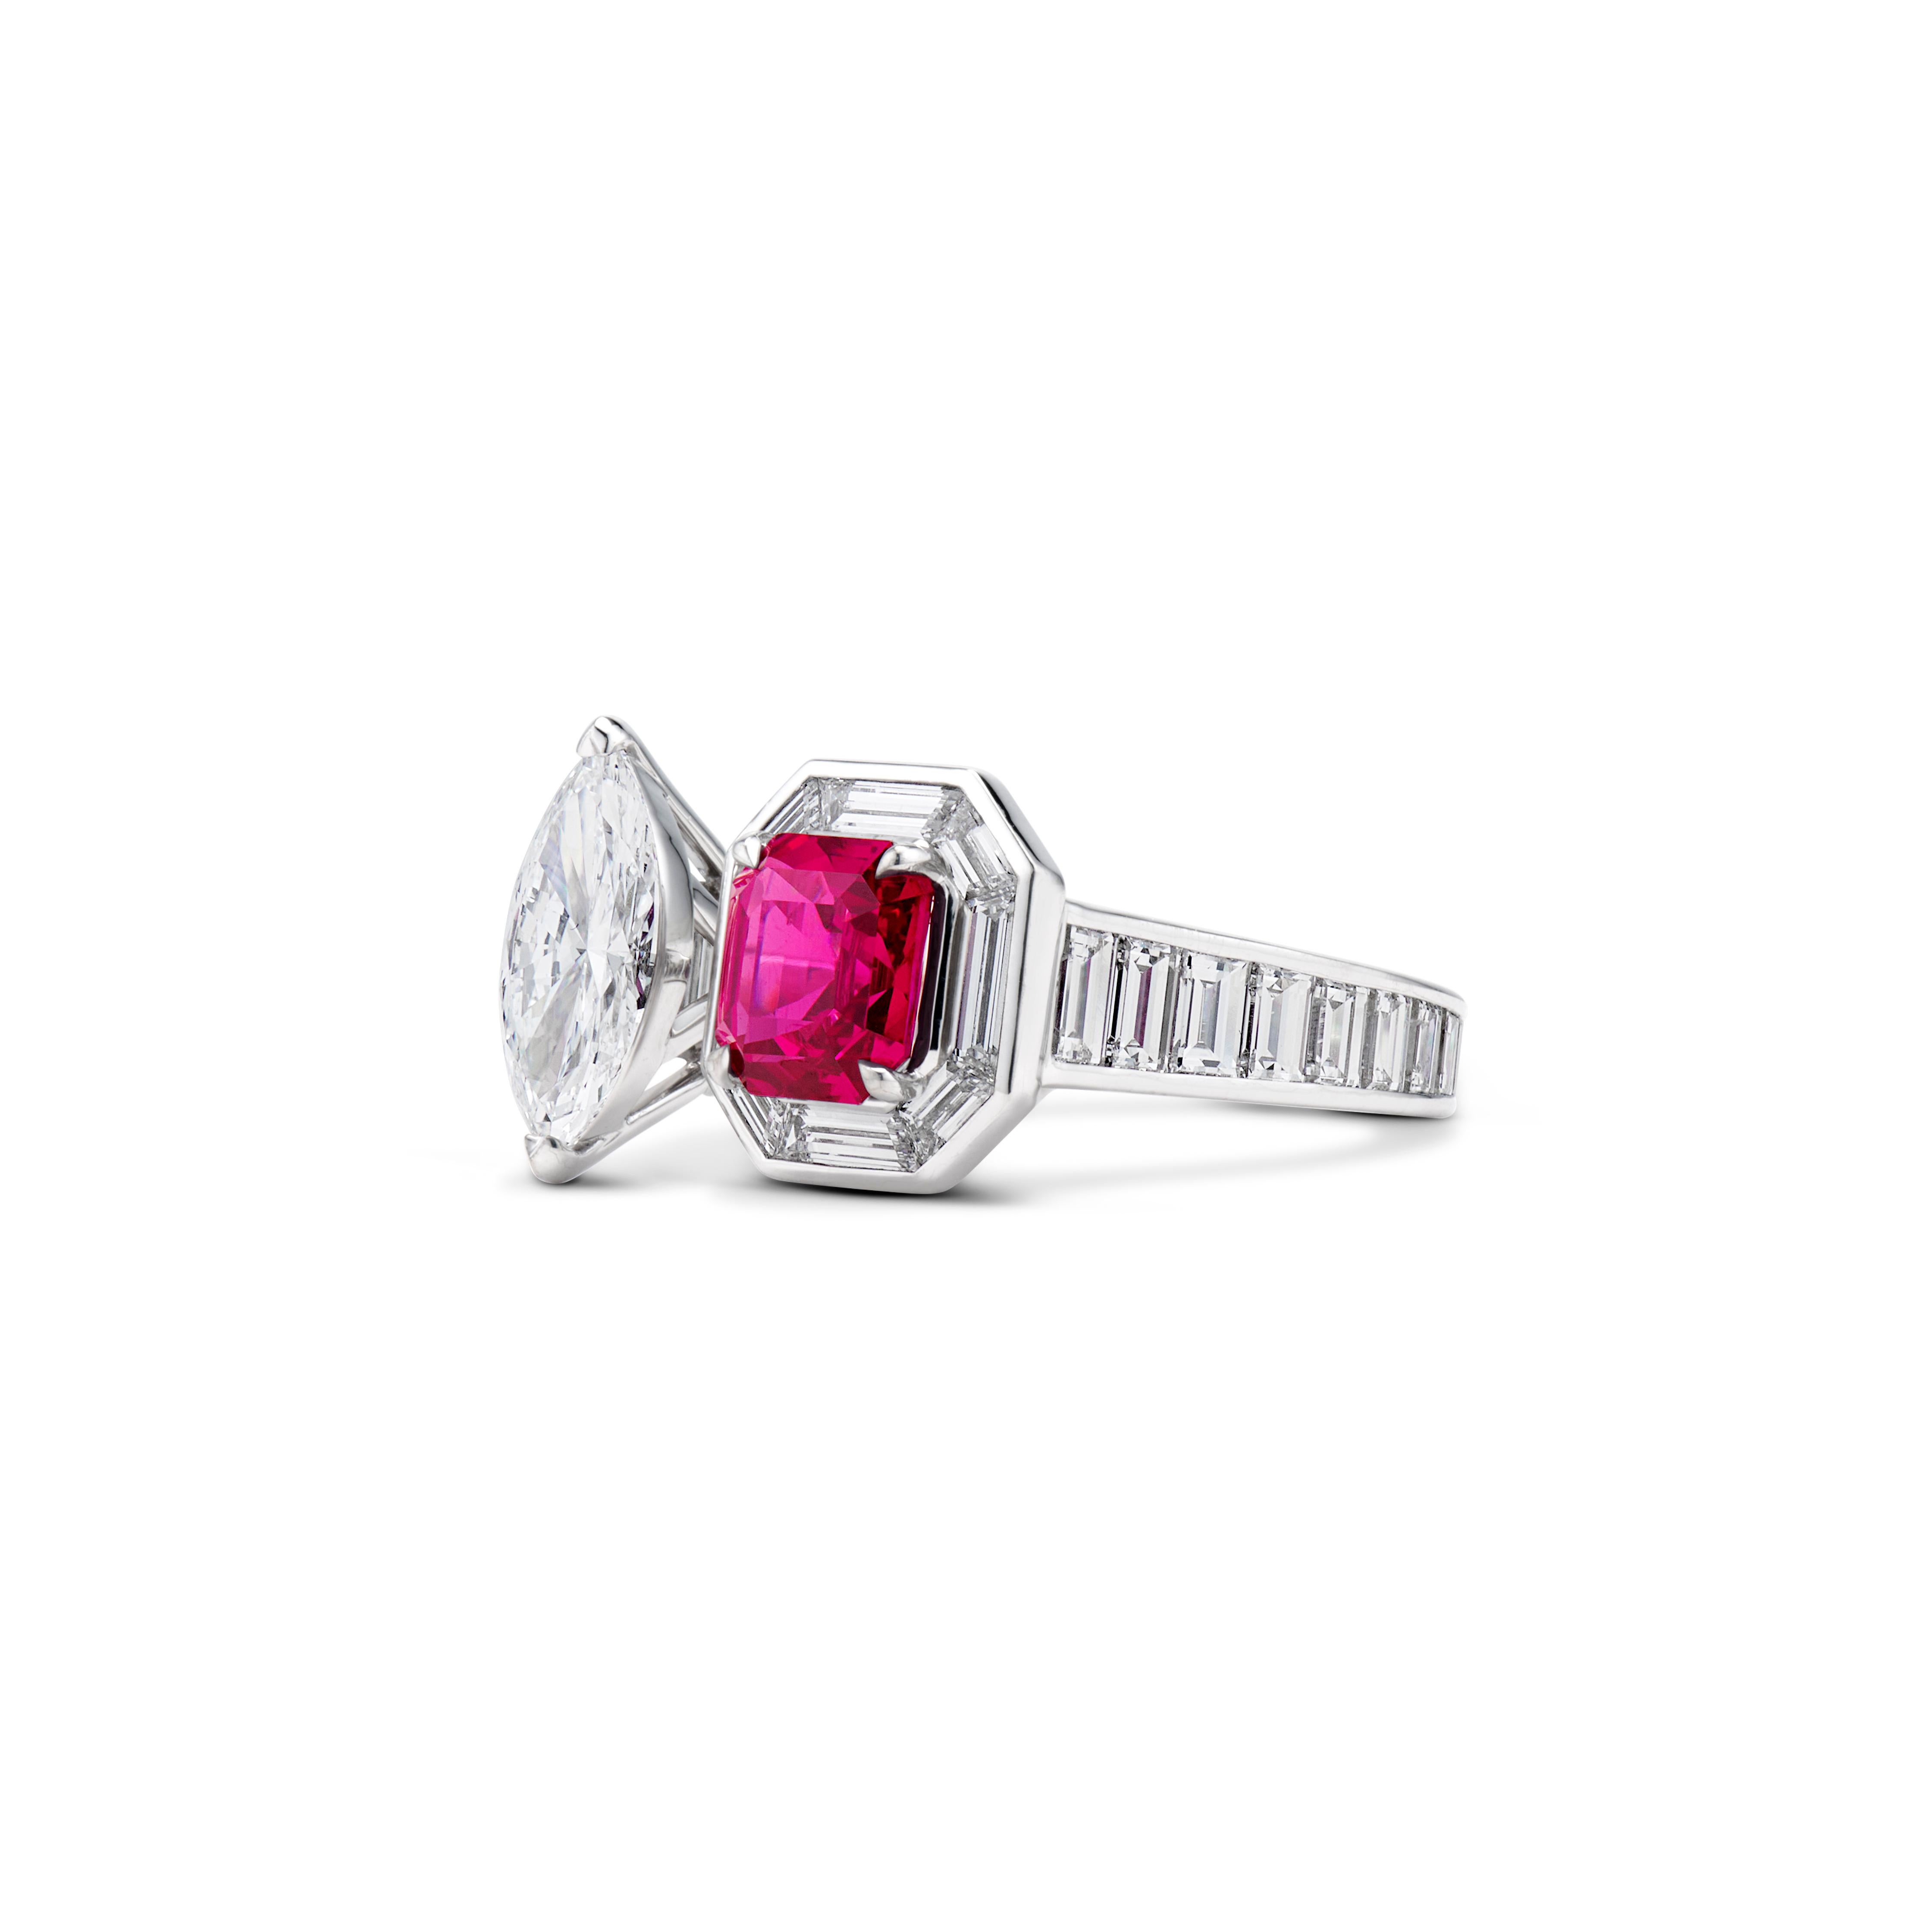 From the Passion & Strength collection, the Ruby & Marquise Diamond Ring is a timelessly designed toi et moi-style ring. 
The ring features a 2.05-carat GRS certied “vibrant” Mozambican no-heat ruby ensconced in a regal halo of custom-cut baguette